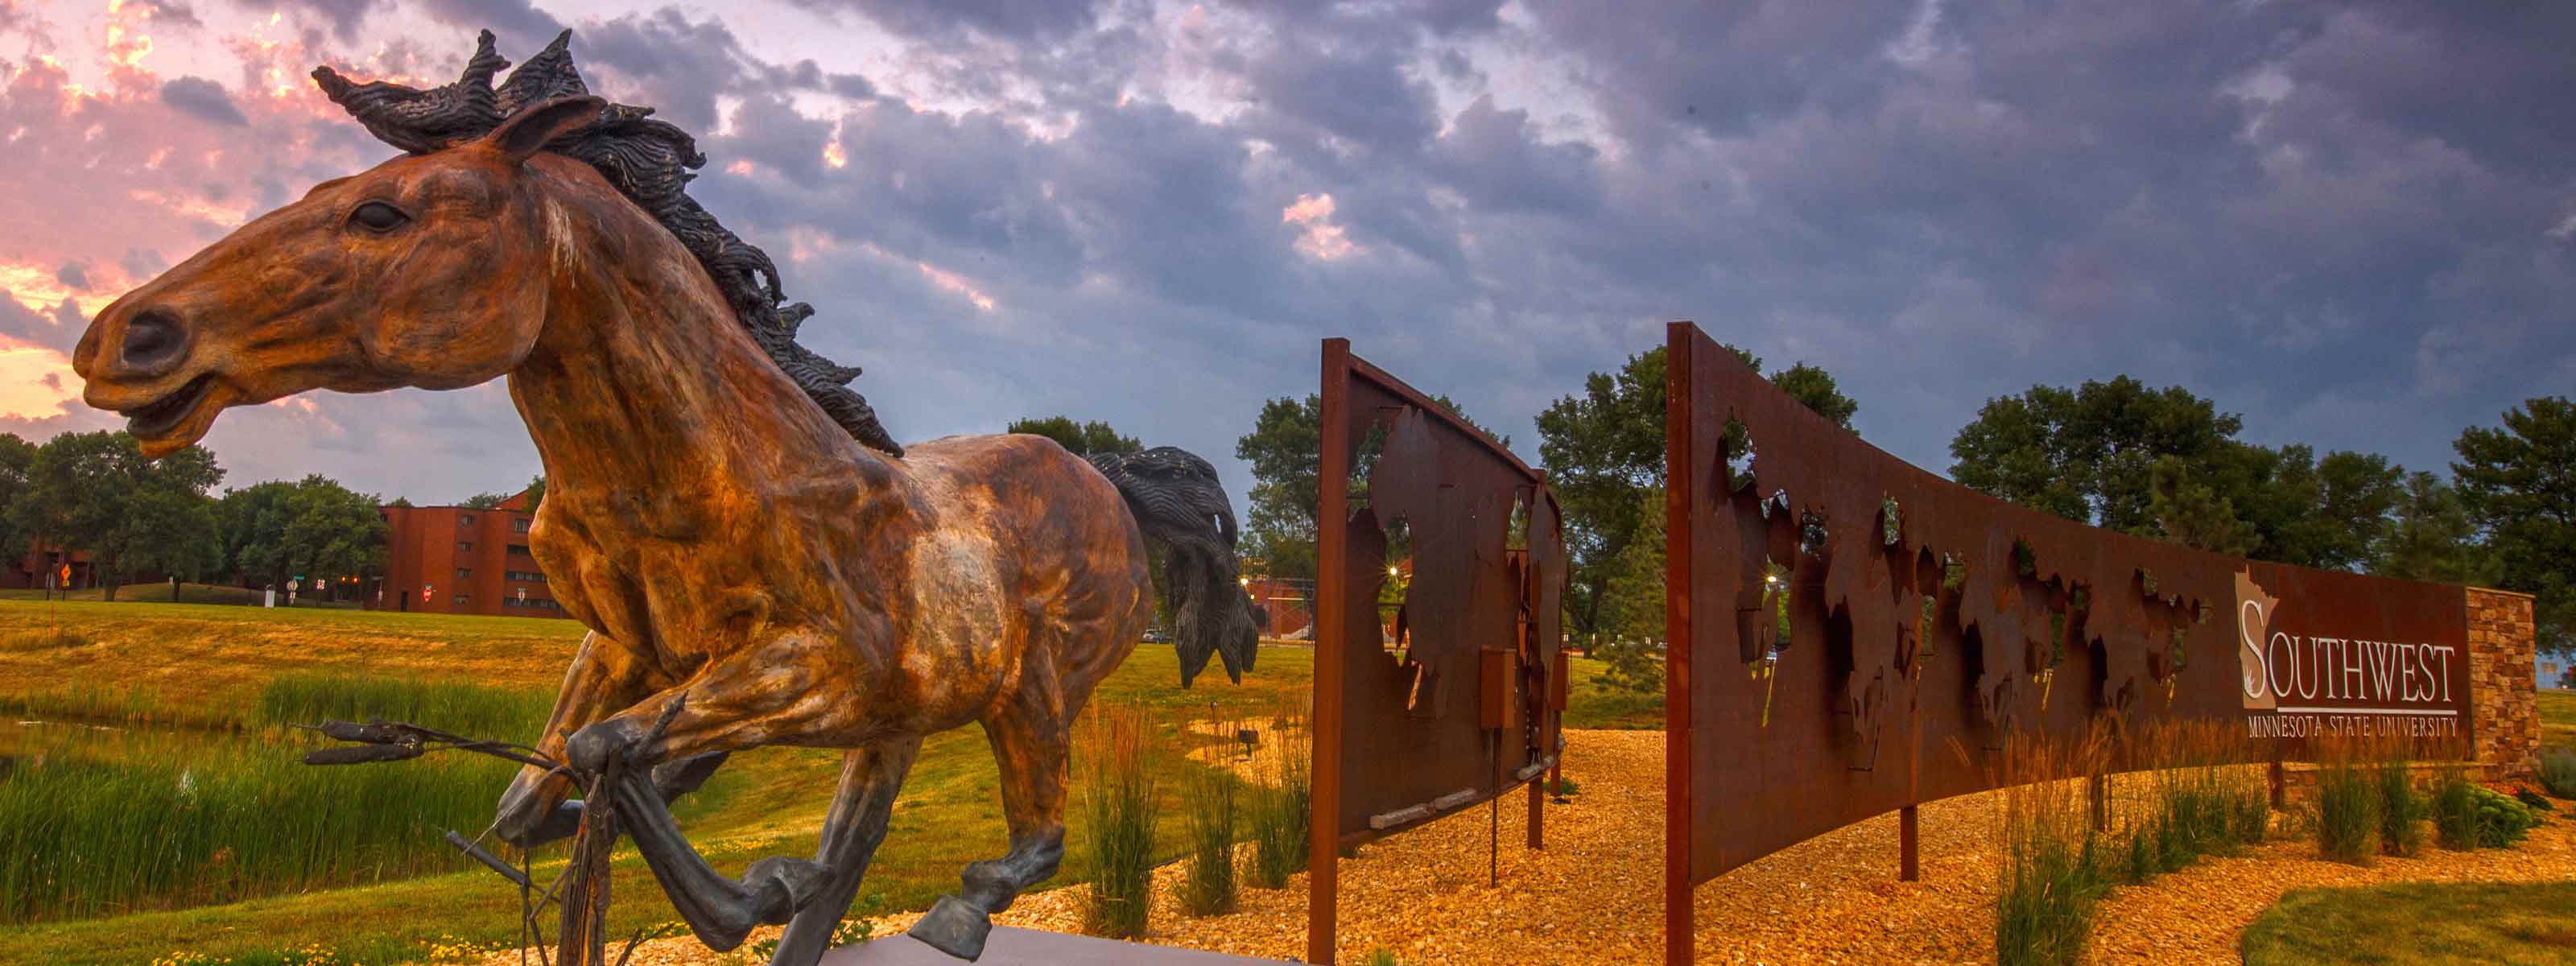 mustang statue and smsu sign